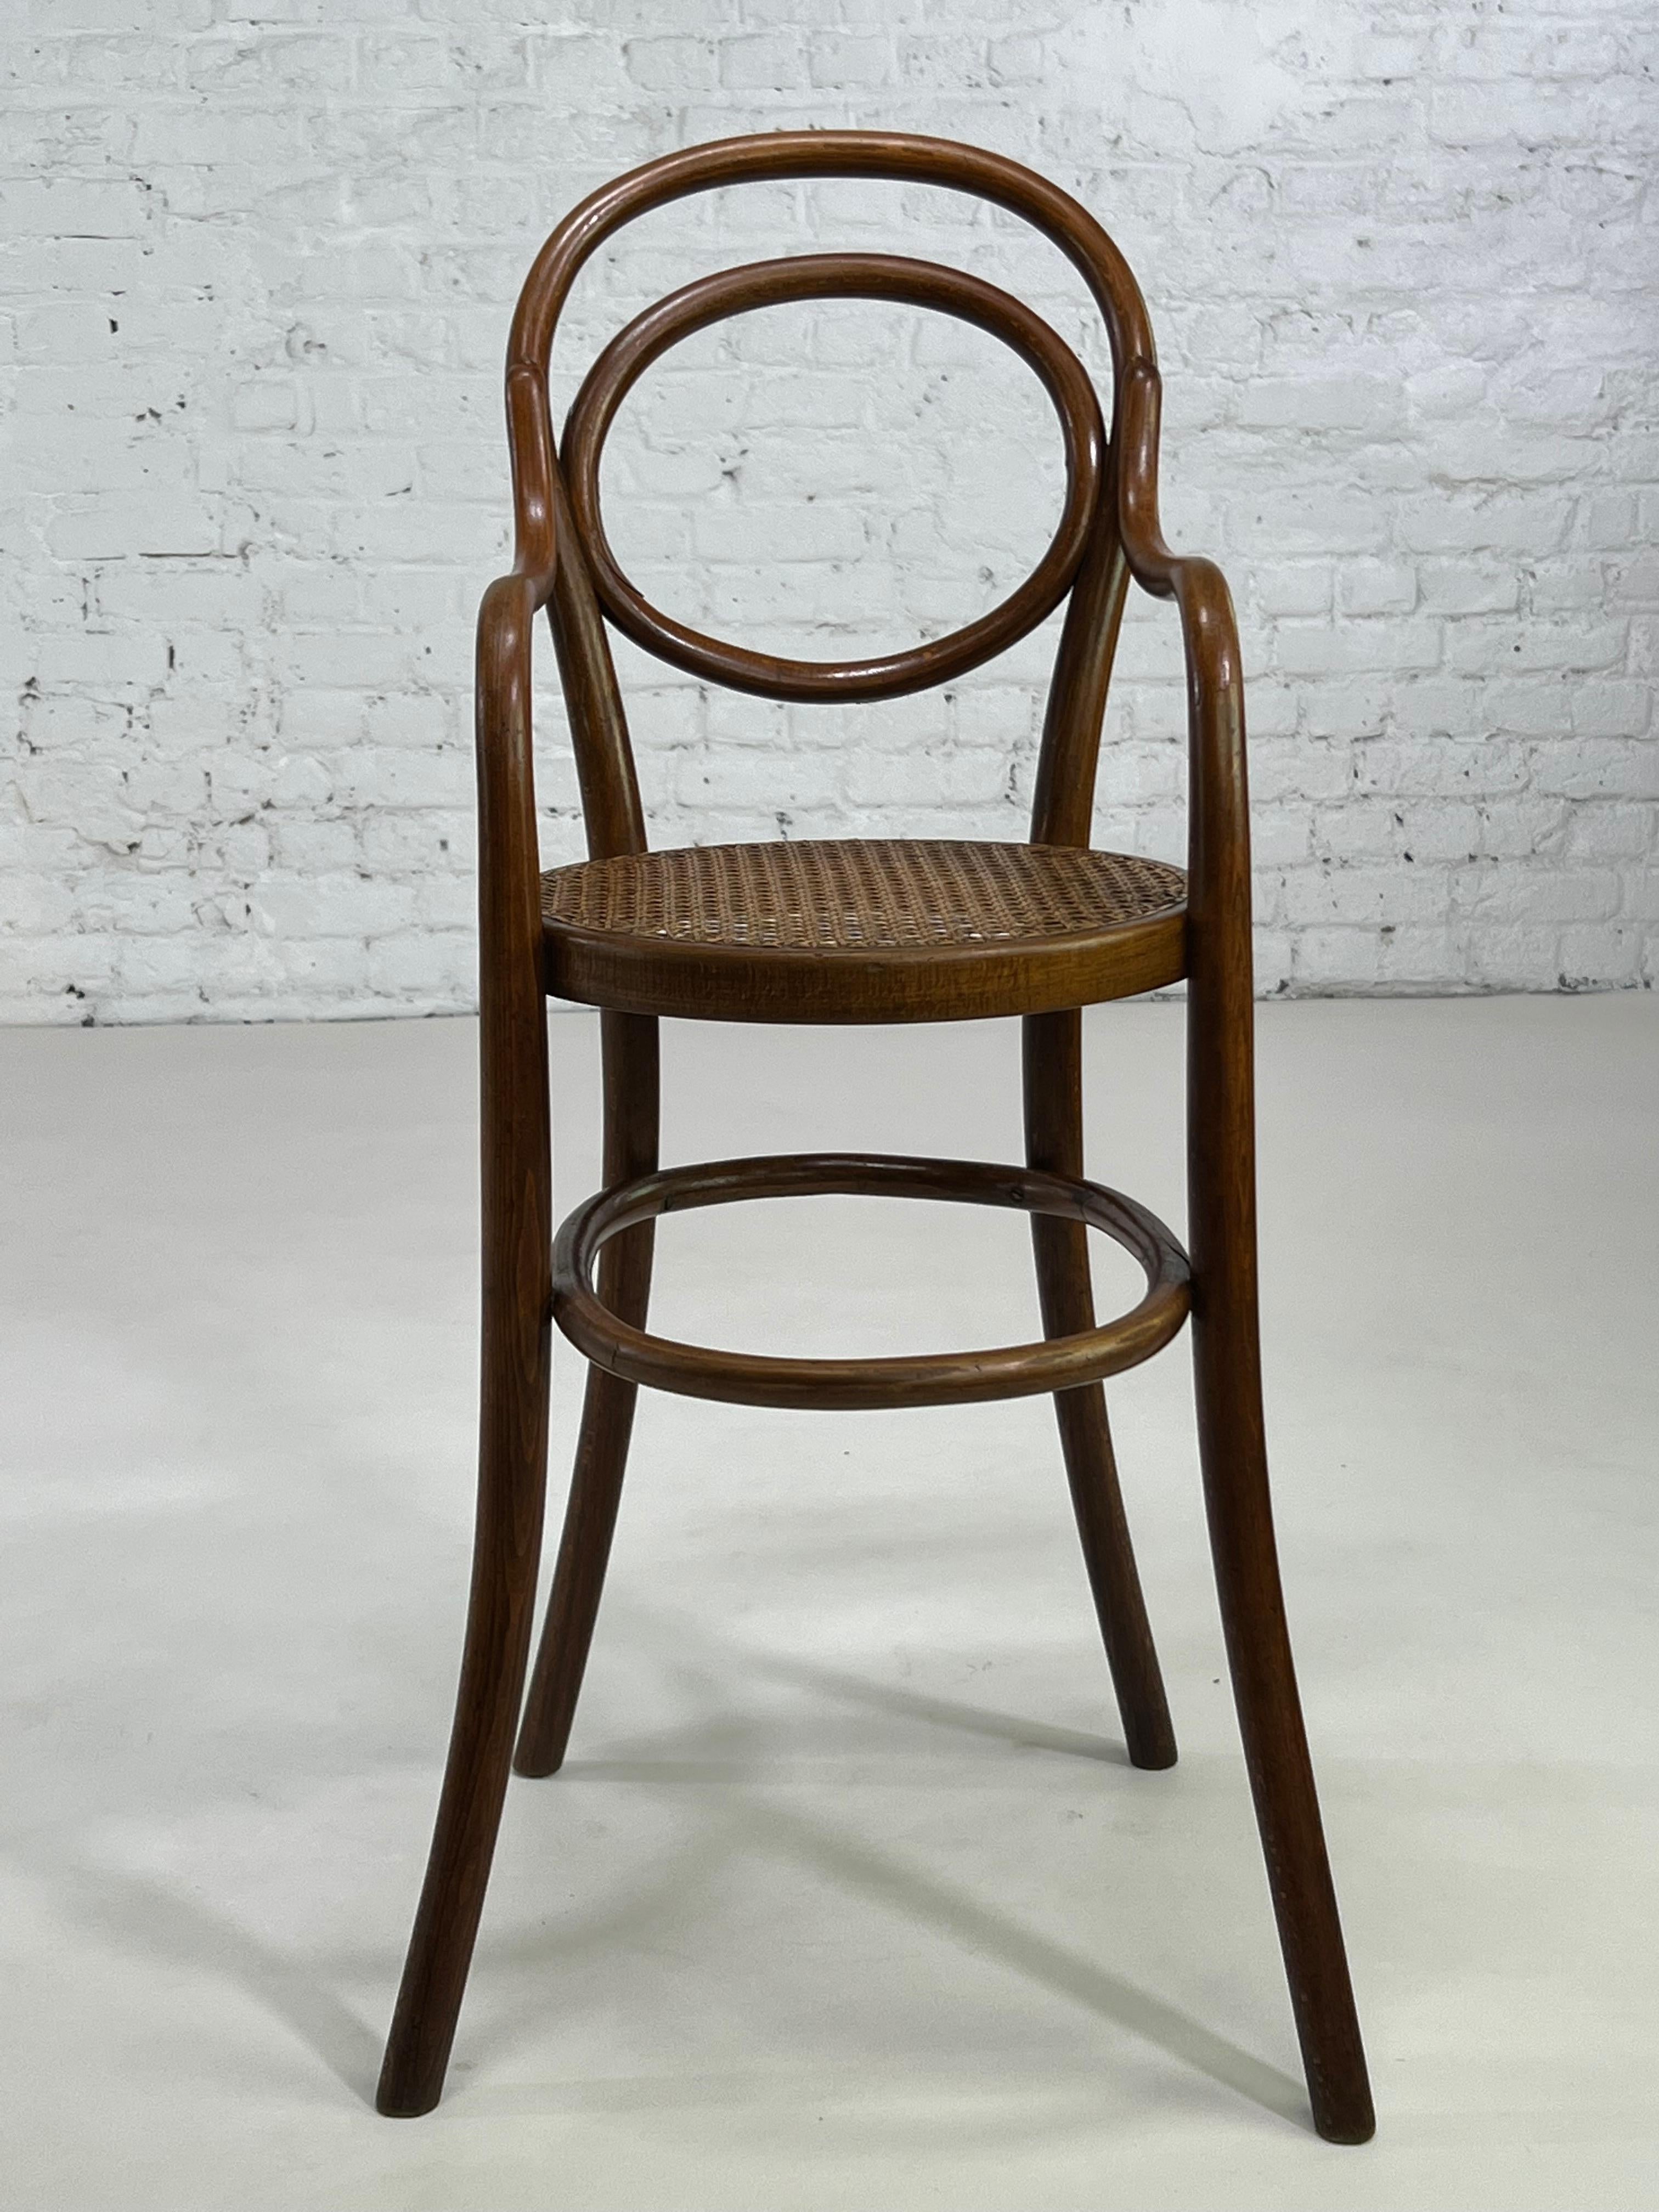 Art Nouveau Antique Thonet Bentwood and Wicker Caned Children High Chair For Sale